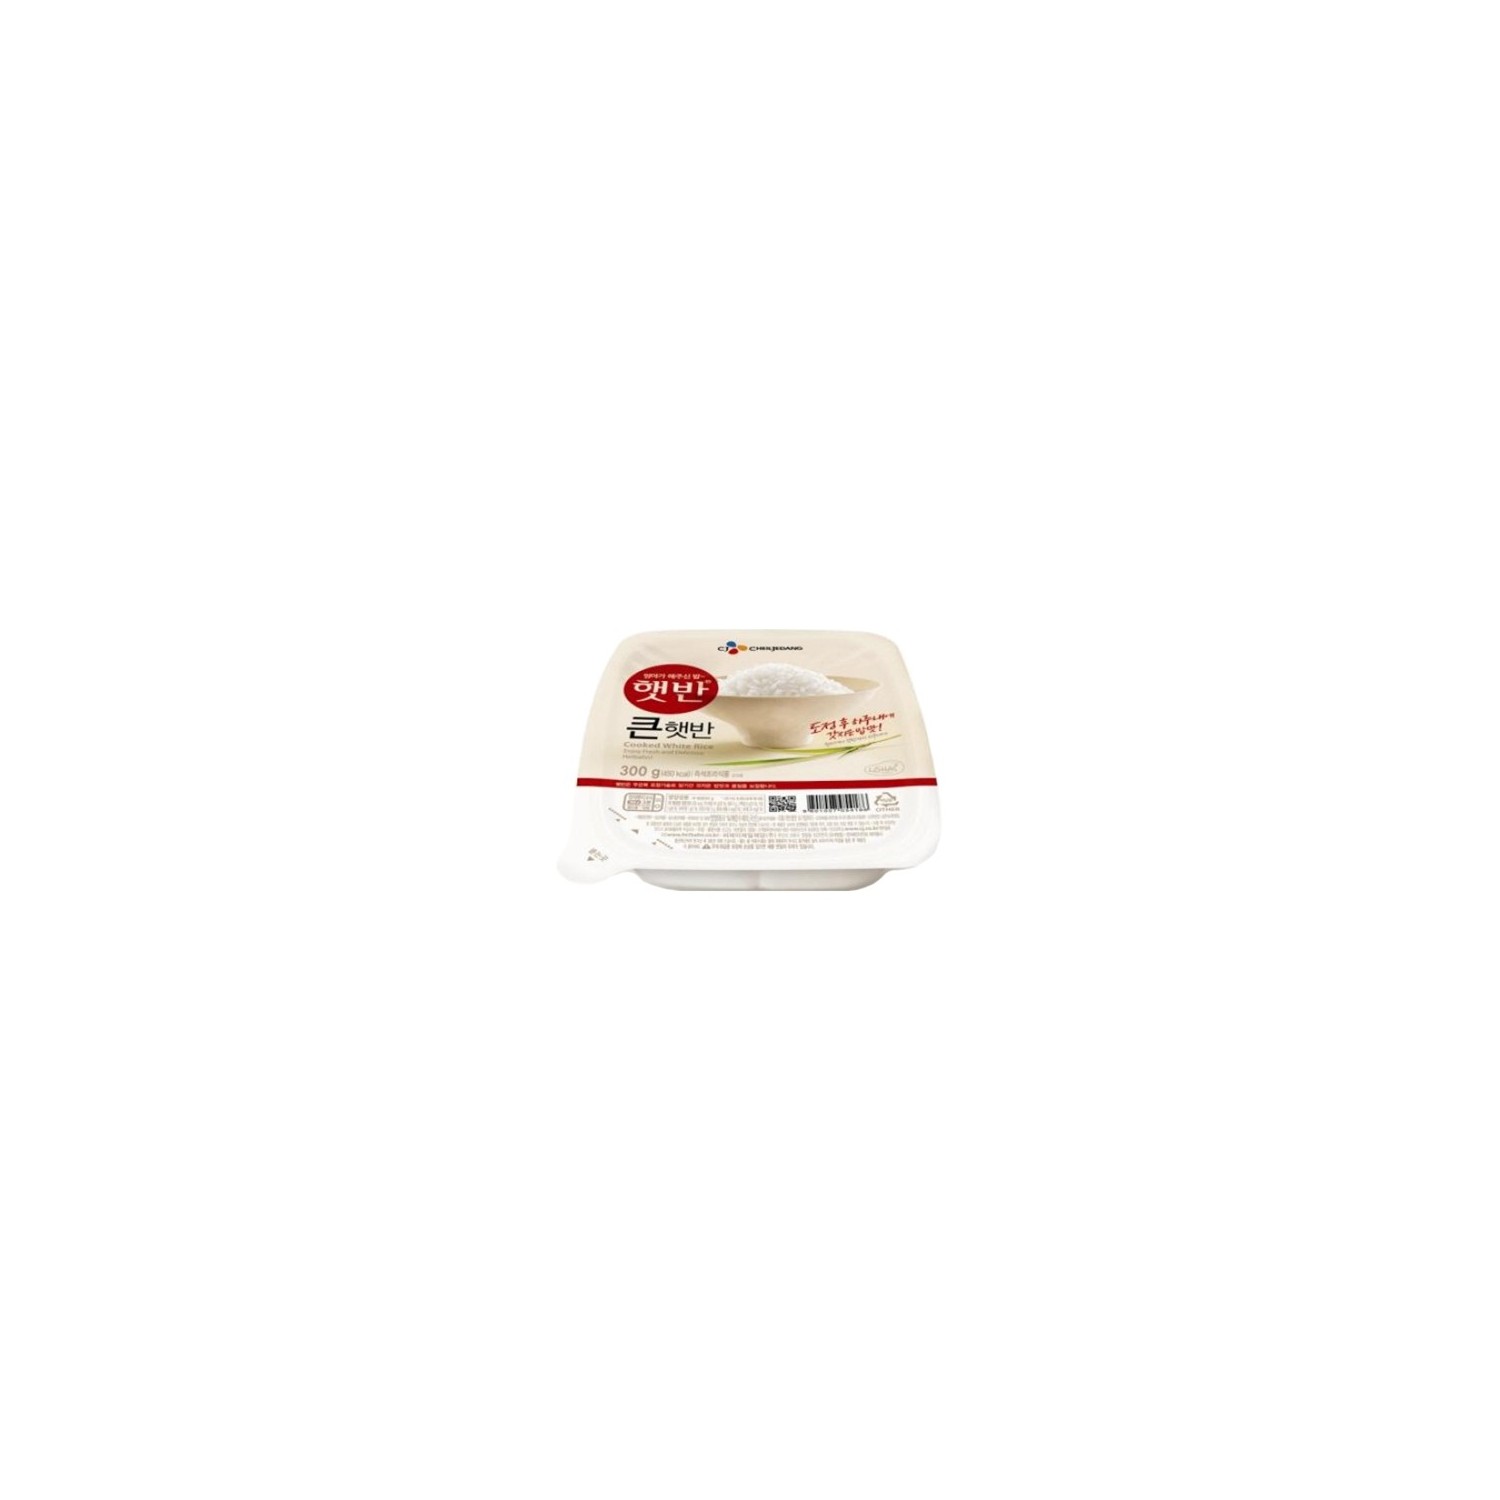 CheilJeDang Microwavable Cooked Rice 微波米飯 300g White Rice - 8801007054186